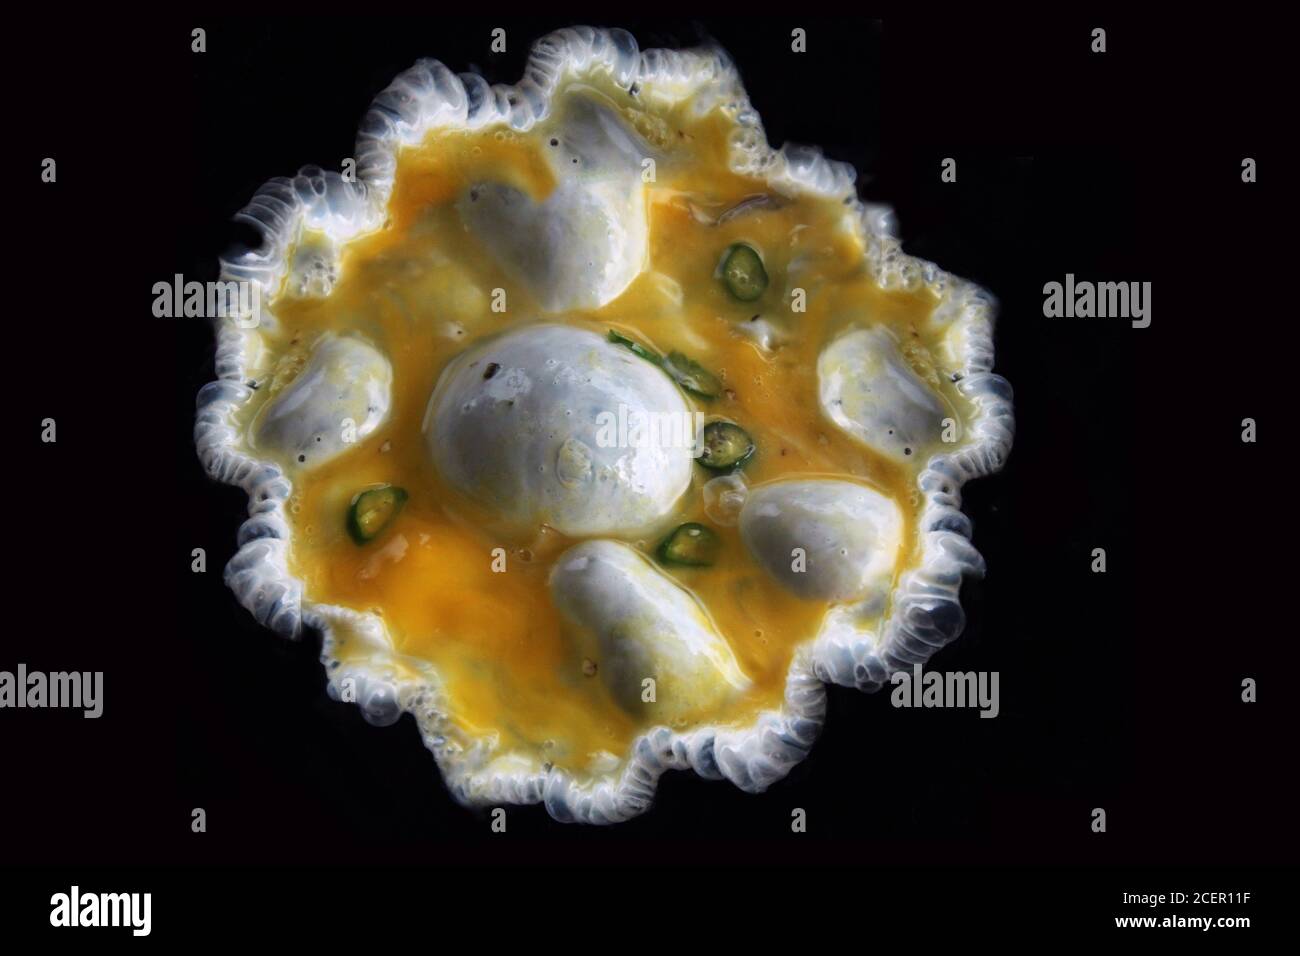 Close-up view of a fried egg in a plate. Khulna, Bangladesh. Stock Photo